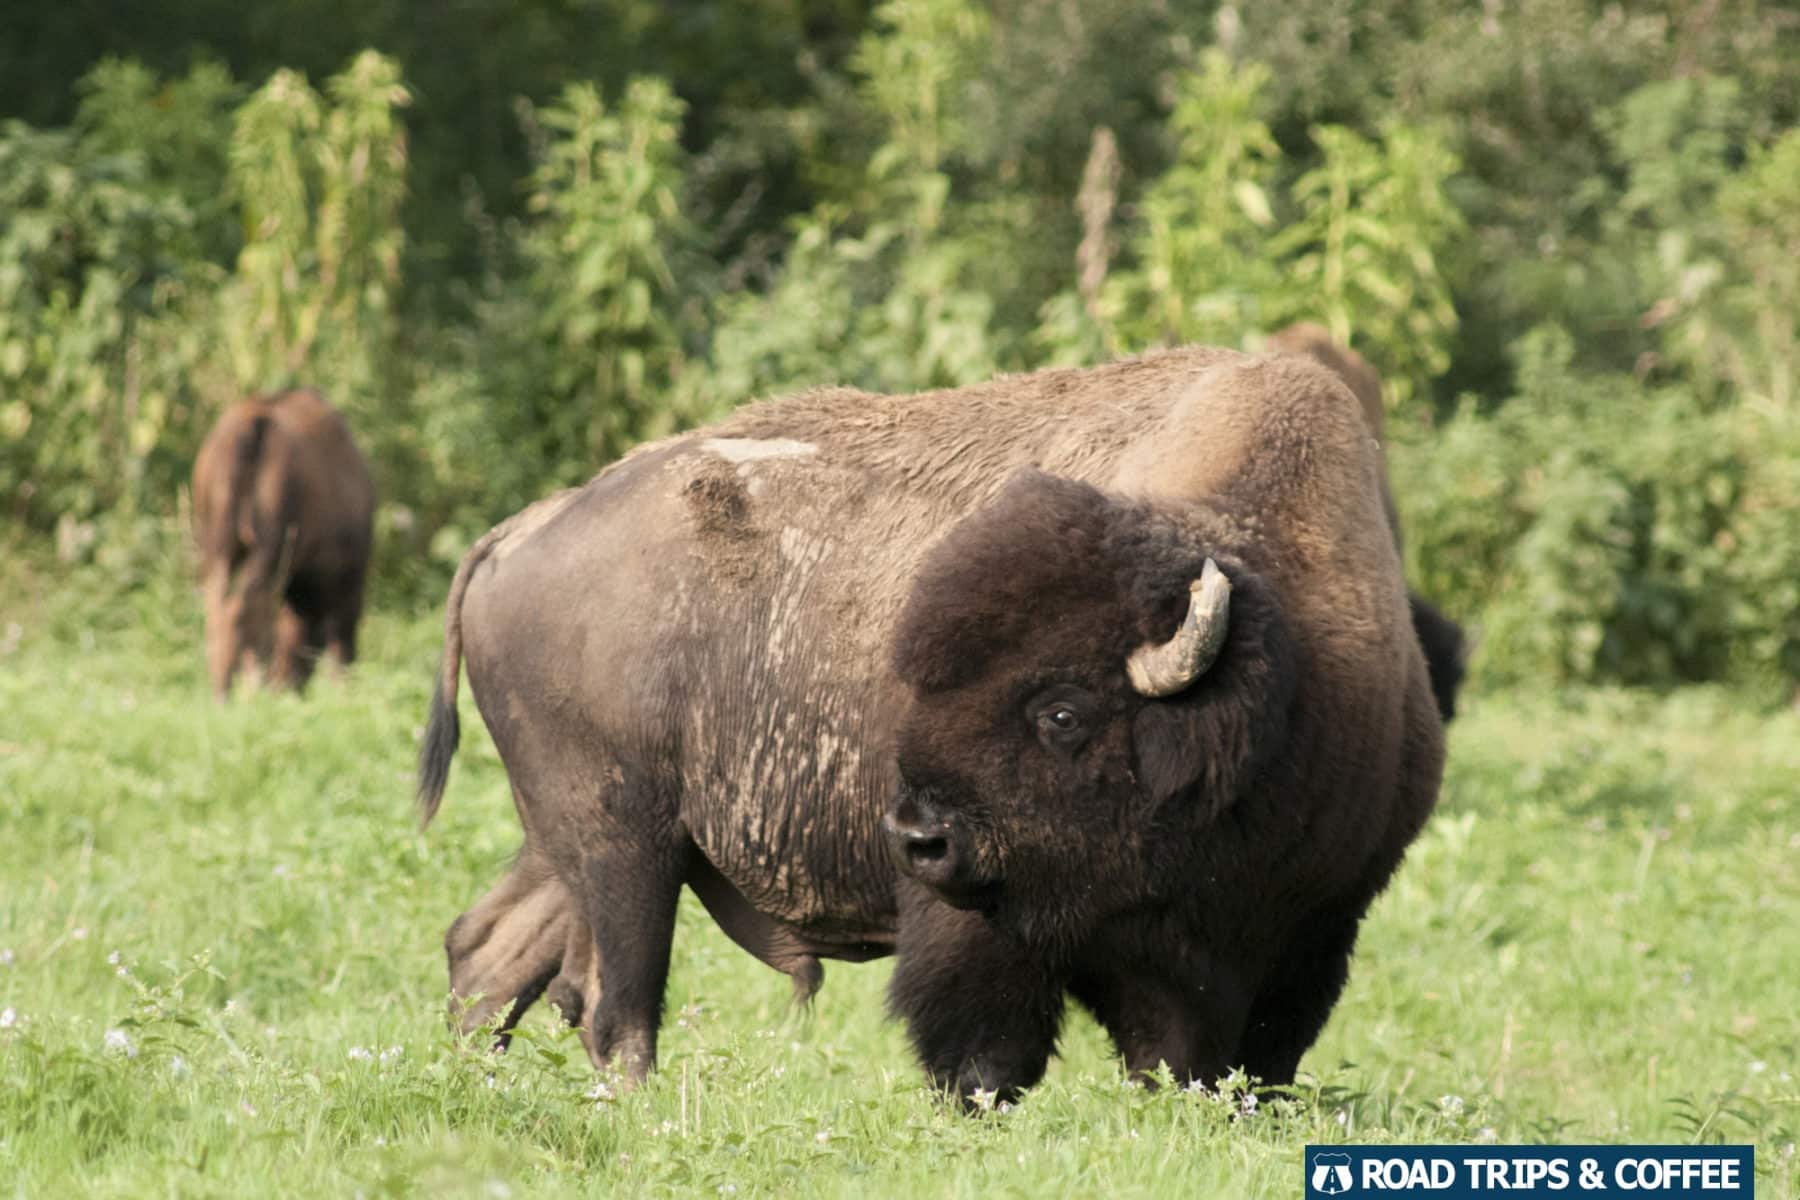 A large bison stands in a grassy field at the Elk & Bison Prairie in Land Between the Lakes National Recreation Area